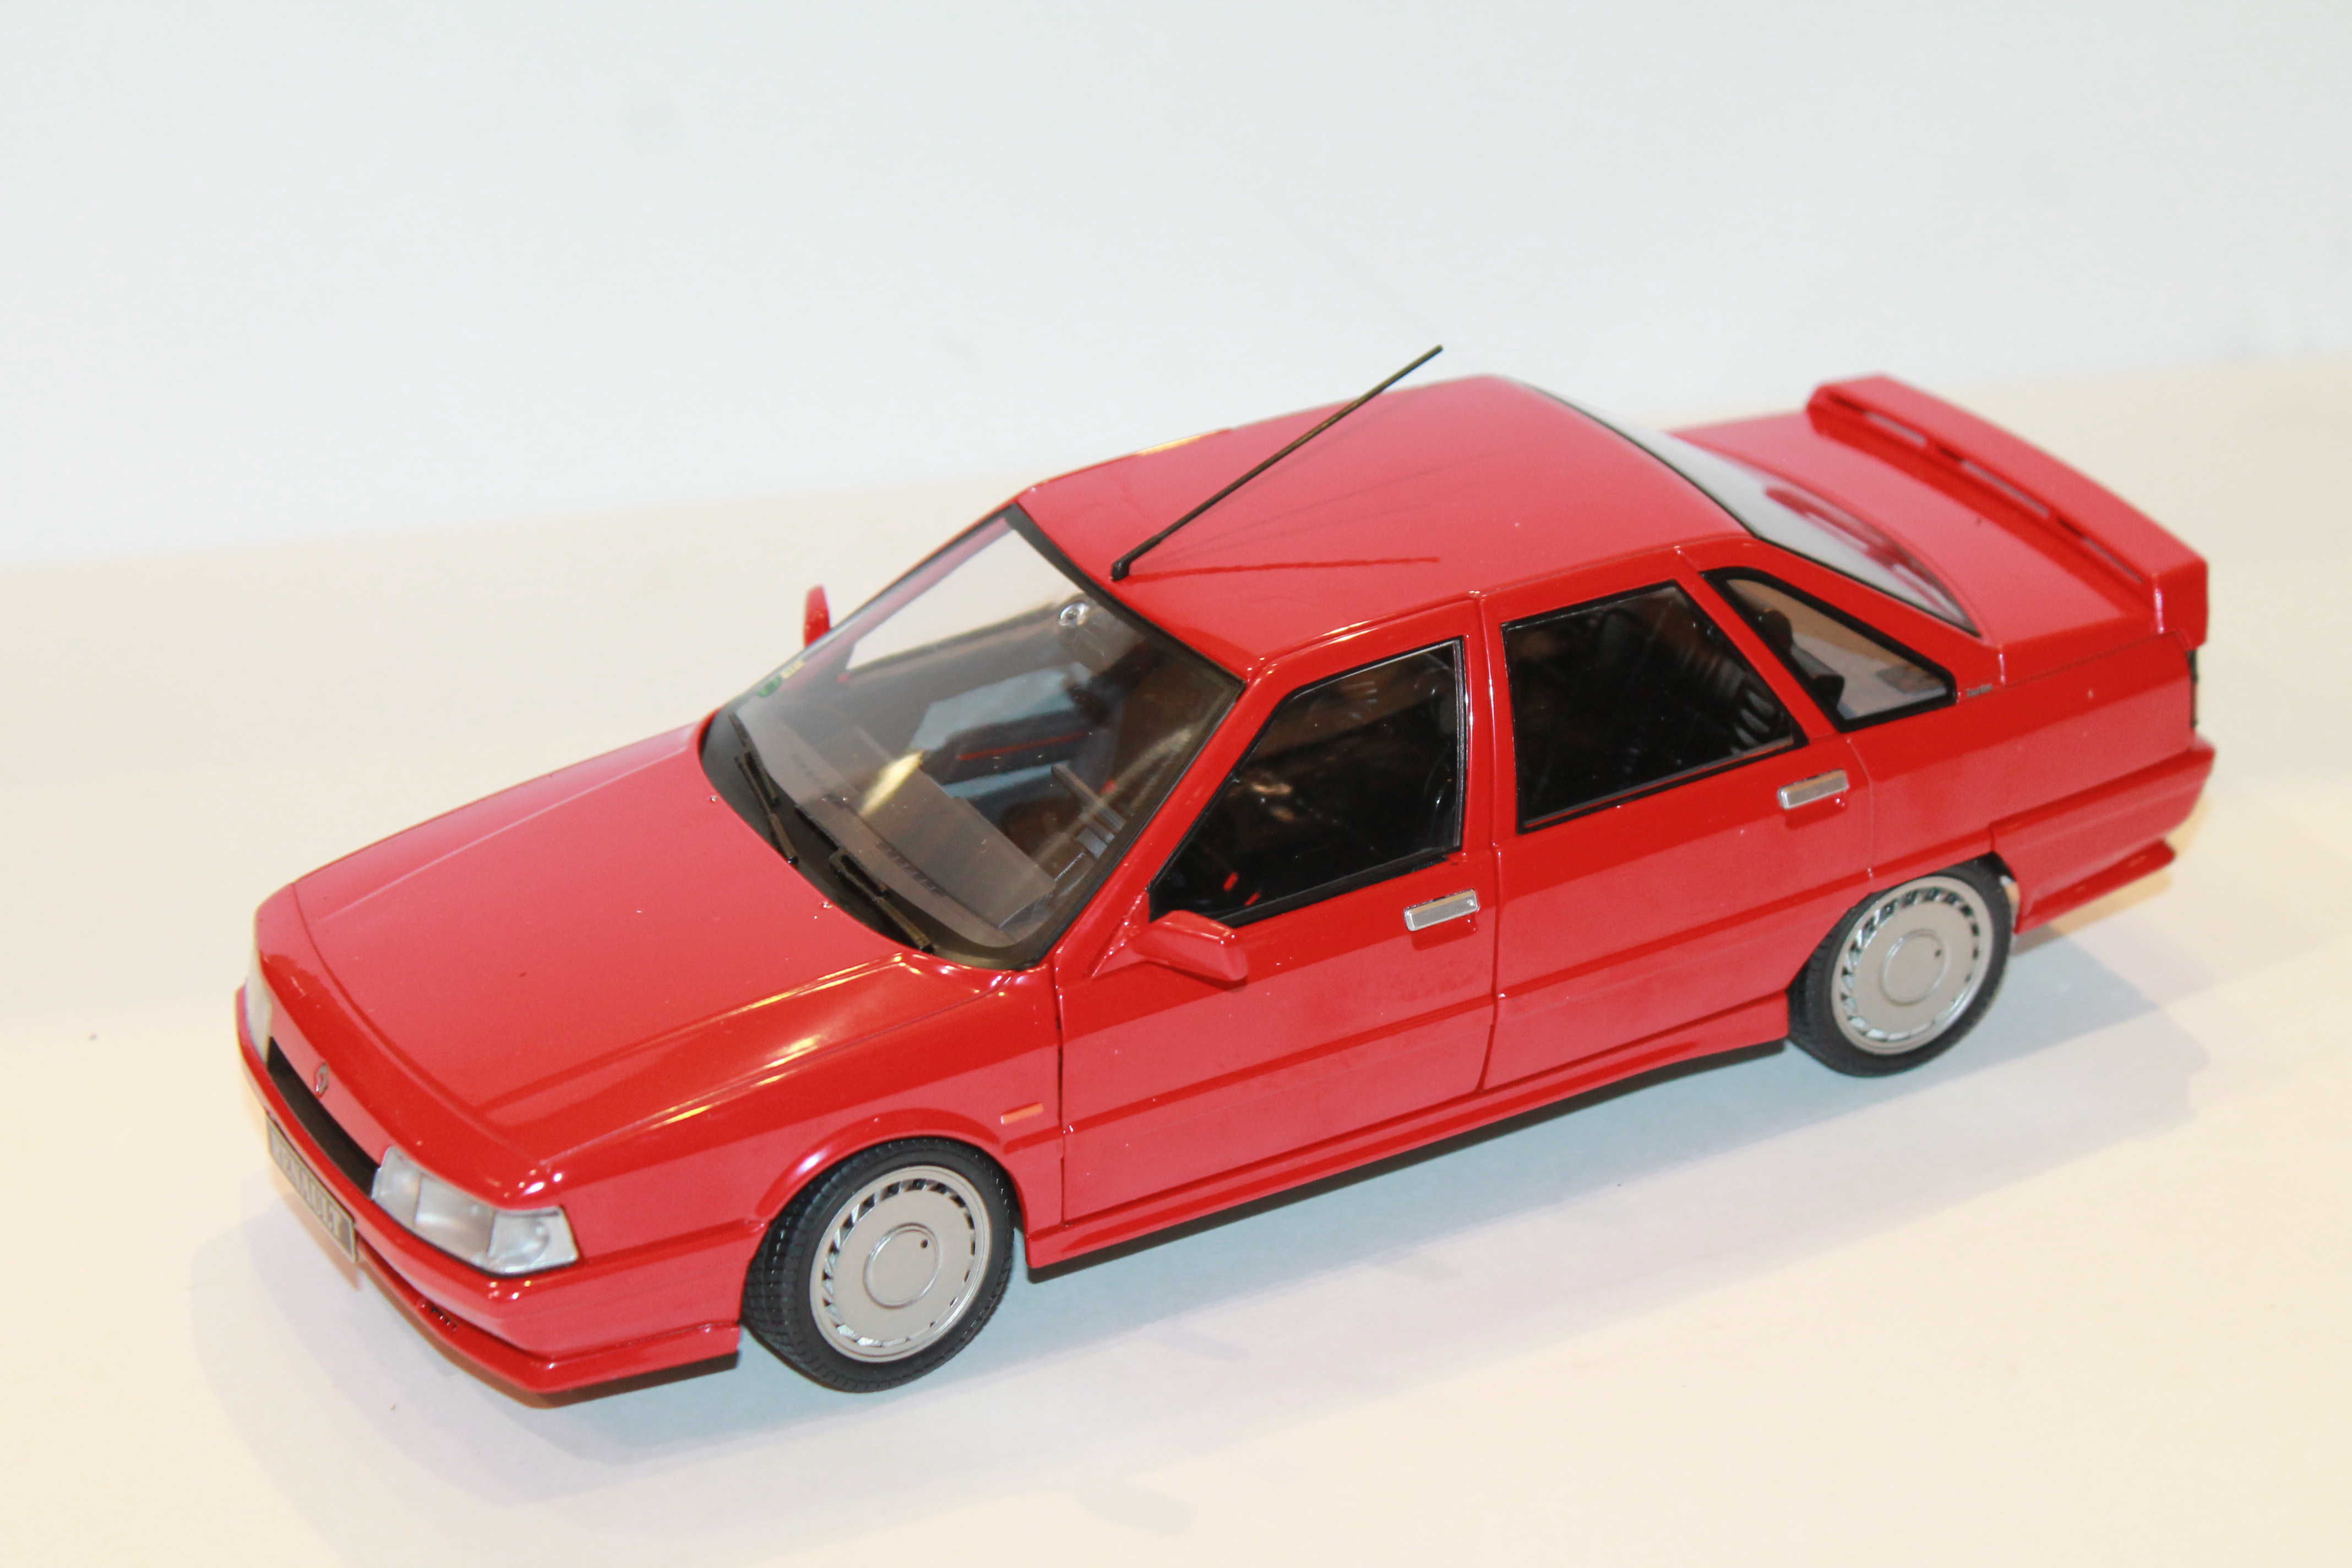 RENAULT 21 TURBO ROUGE MK1 1988 SOLIDO 1/18°